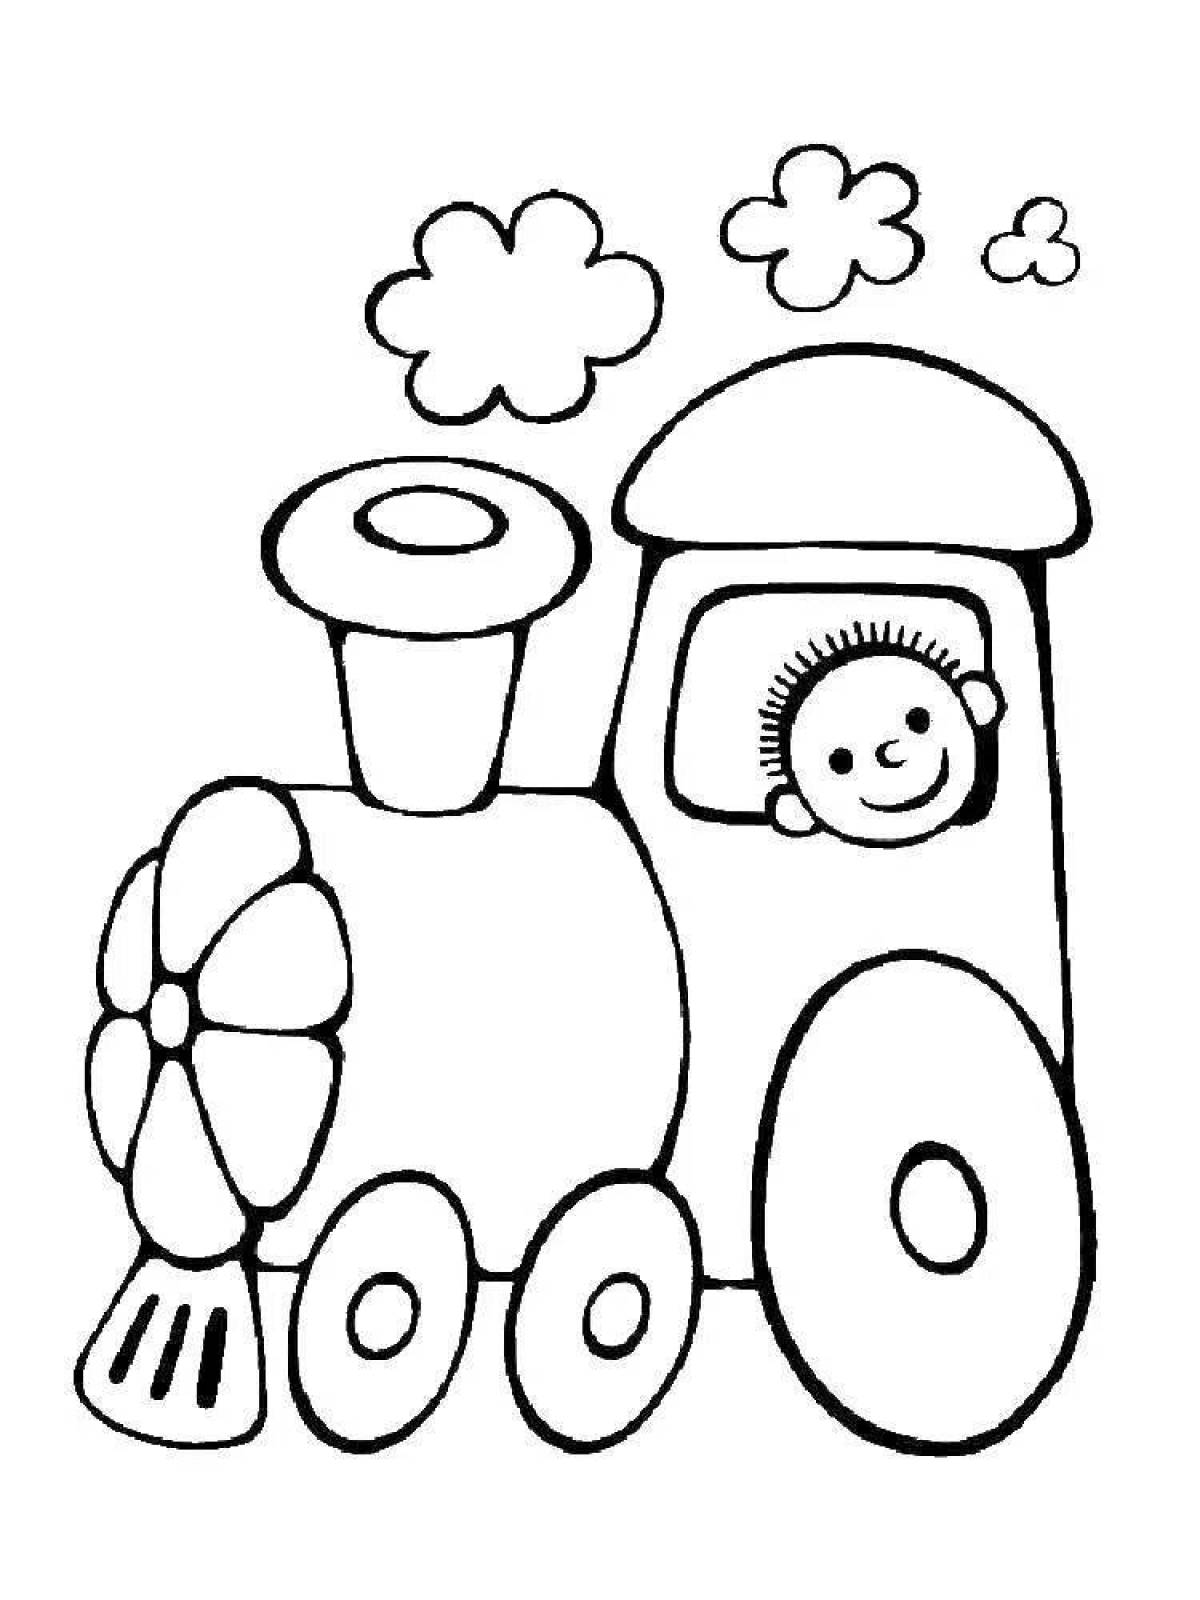 Adorable steam locomotive coloring book for kids